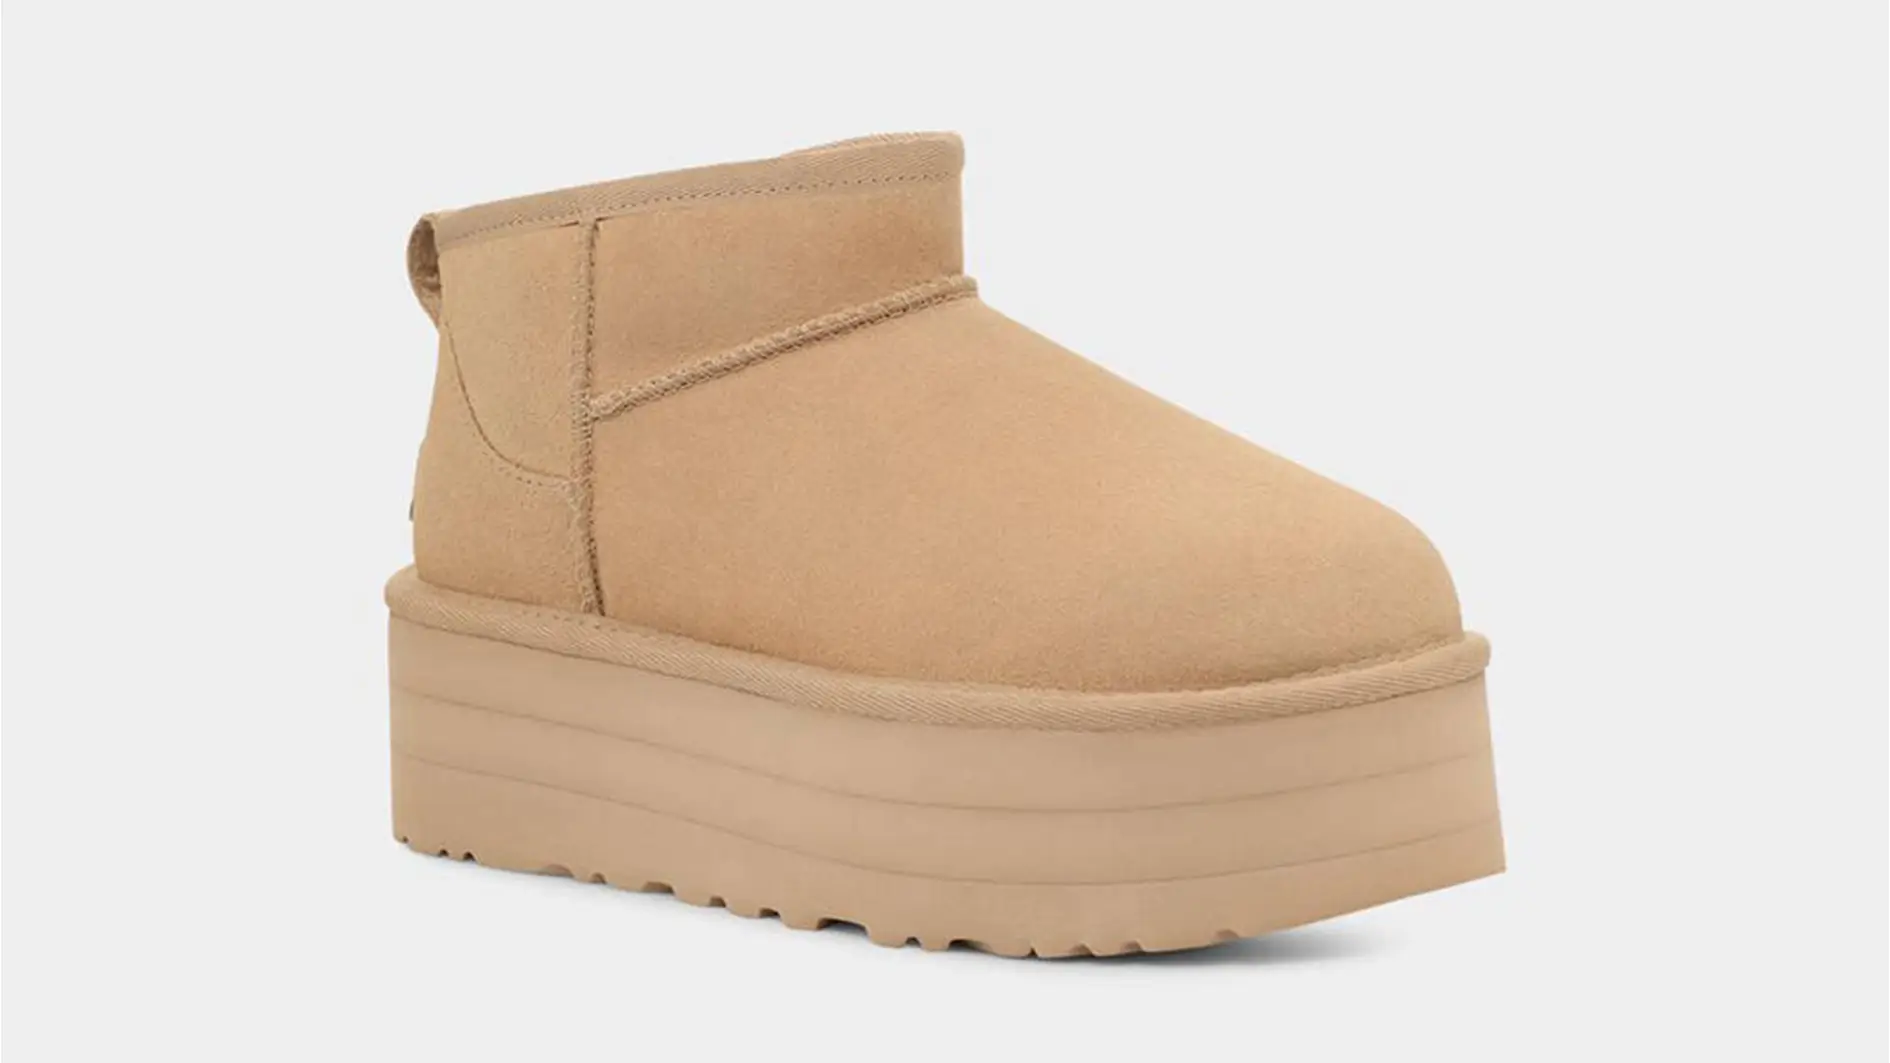 The Ultimate UGG Size Guide: Does UGG Footwear Run True to Size?